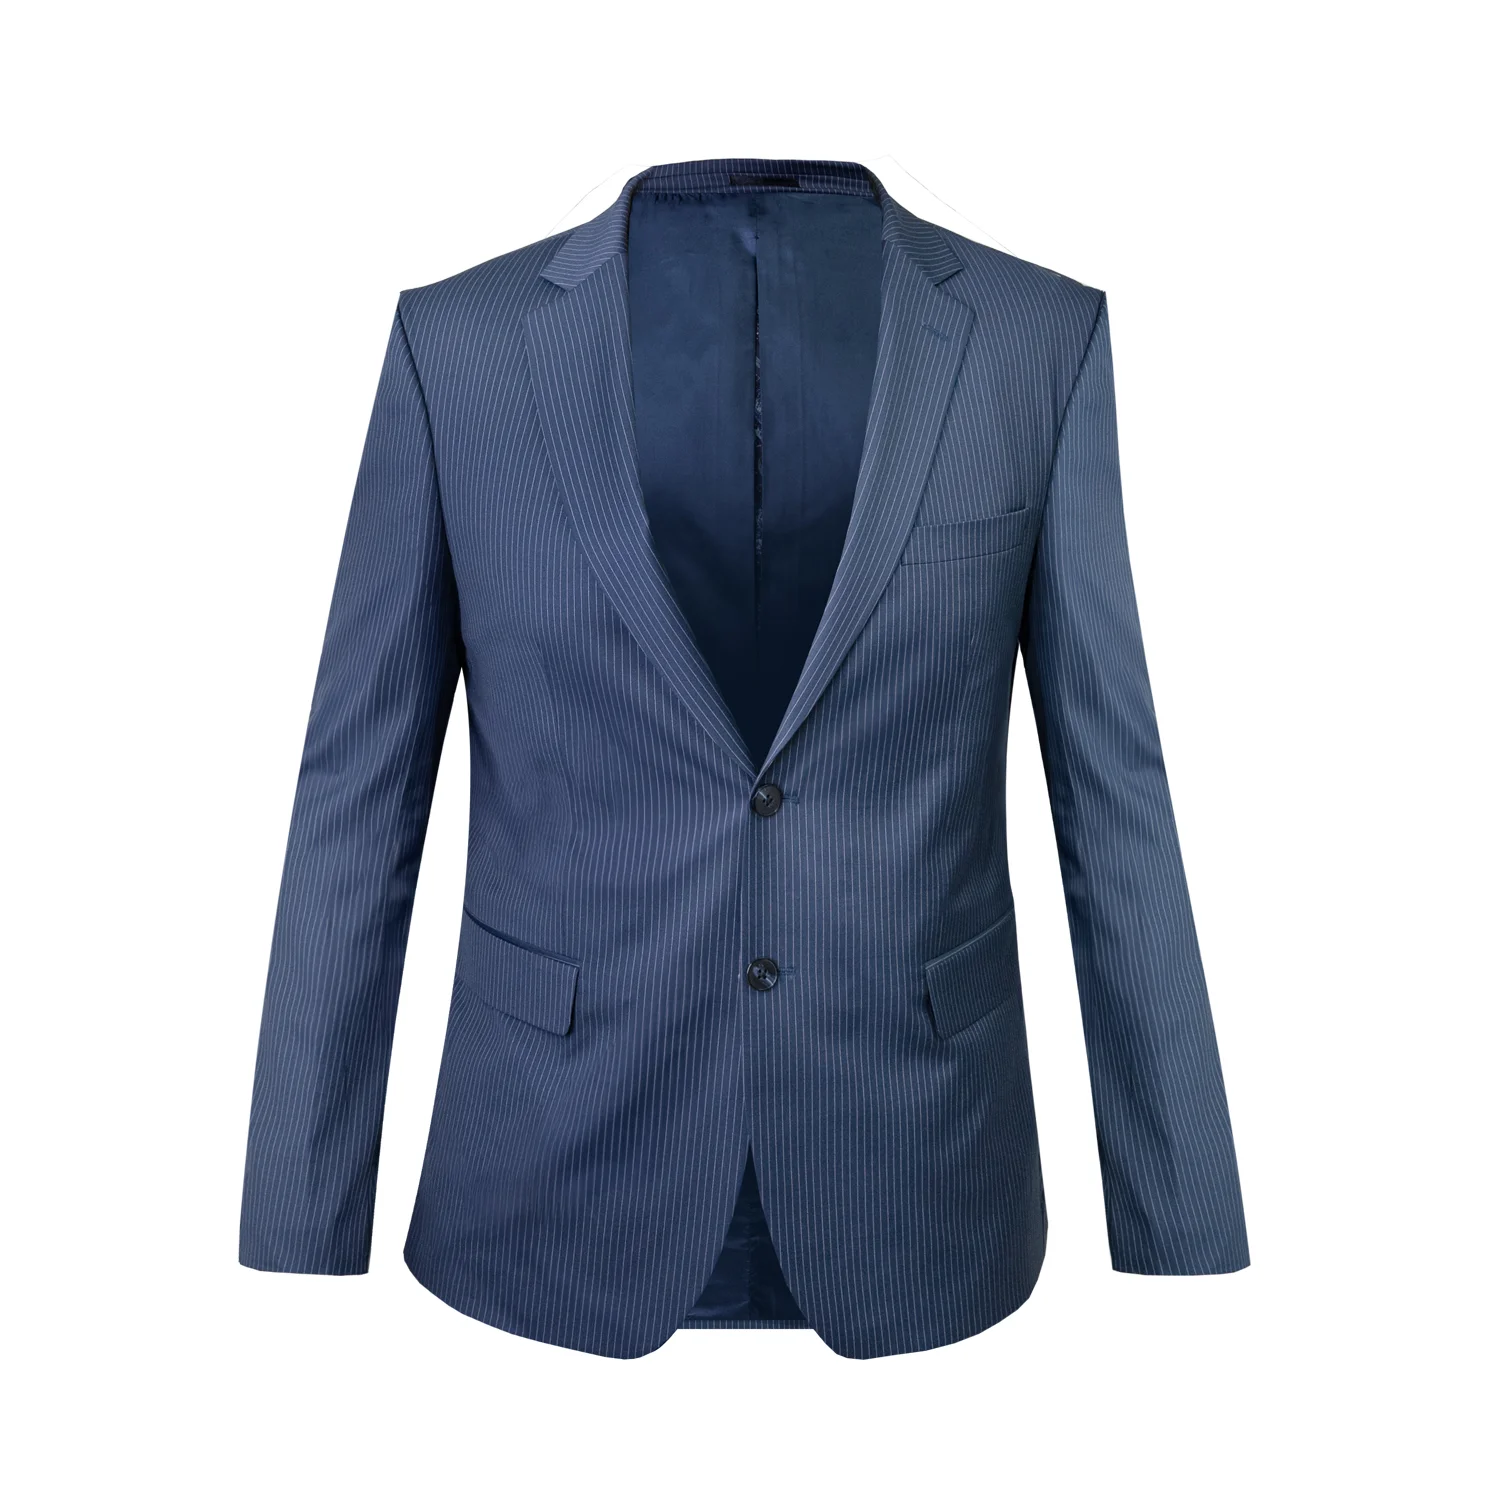 Perfect Blue Pinstripe Suit - Snover